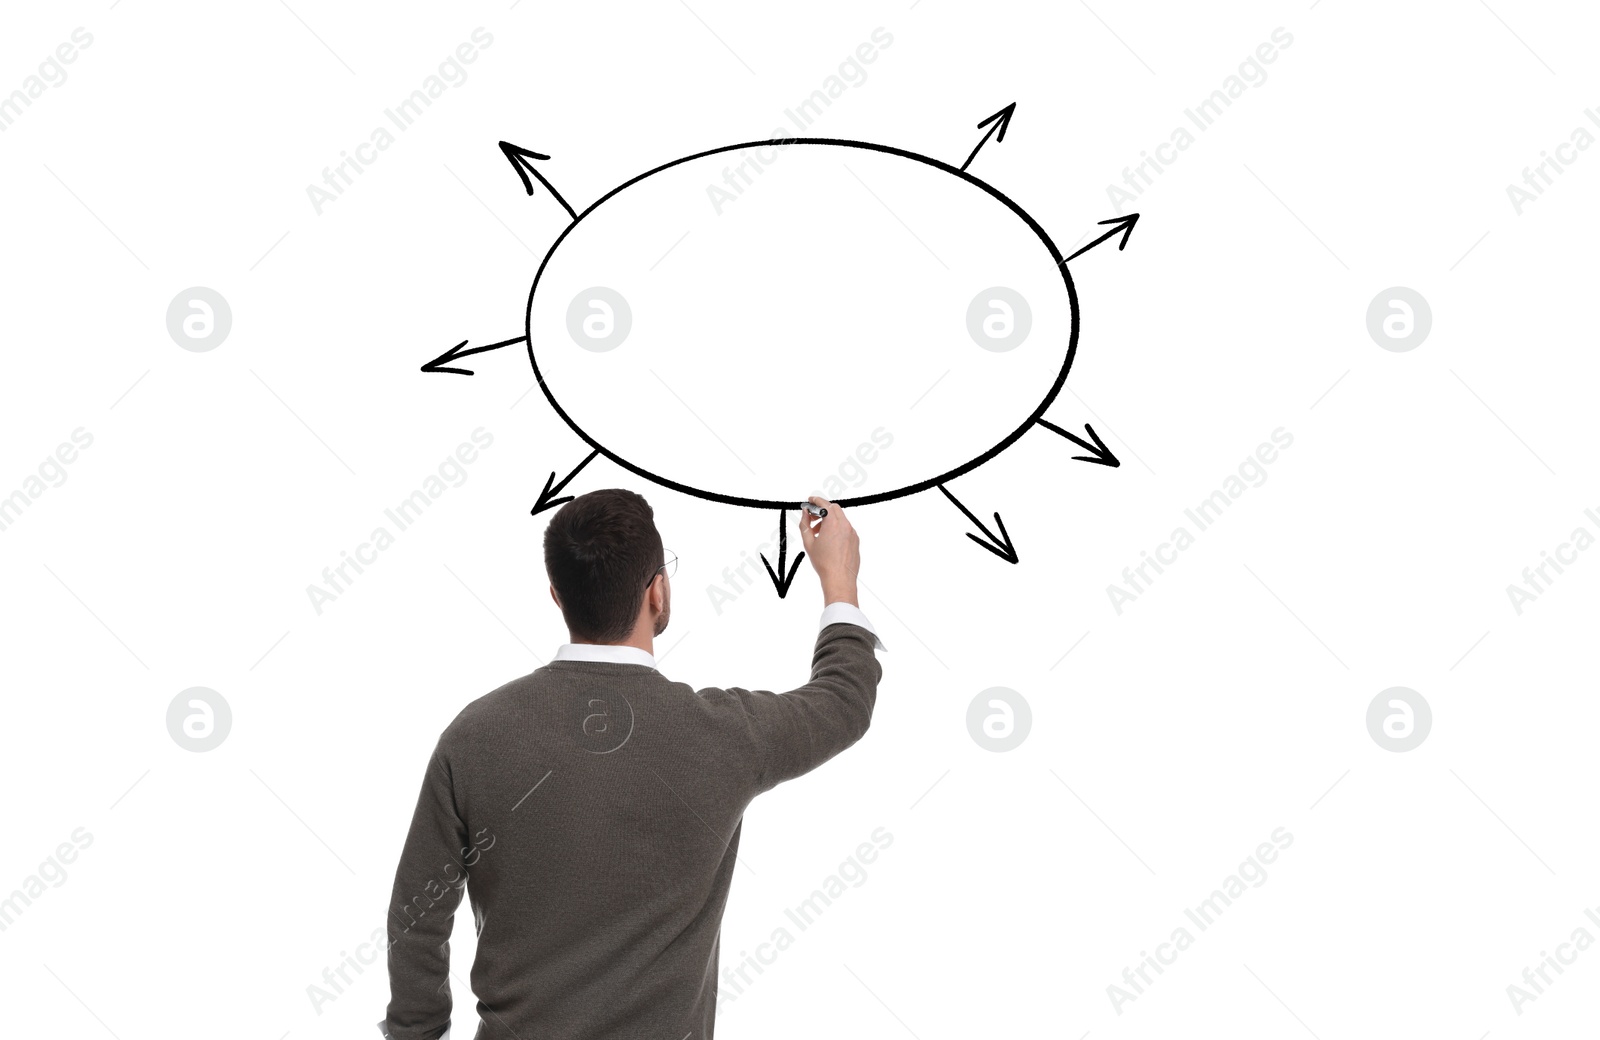 Image of Logic. Man drawing oval to make diagram on white background, back view